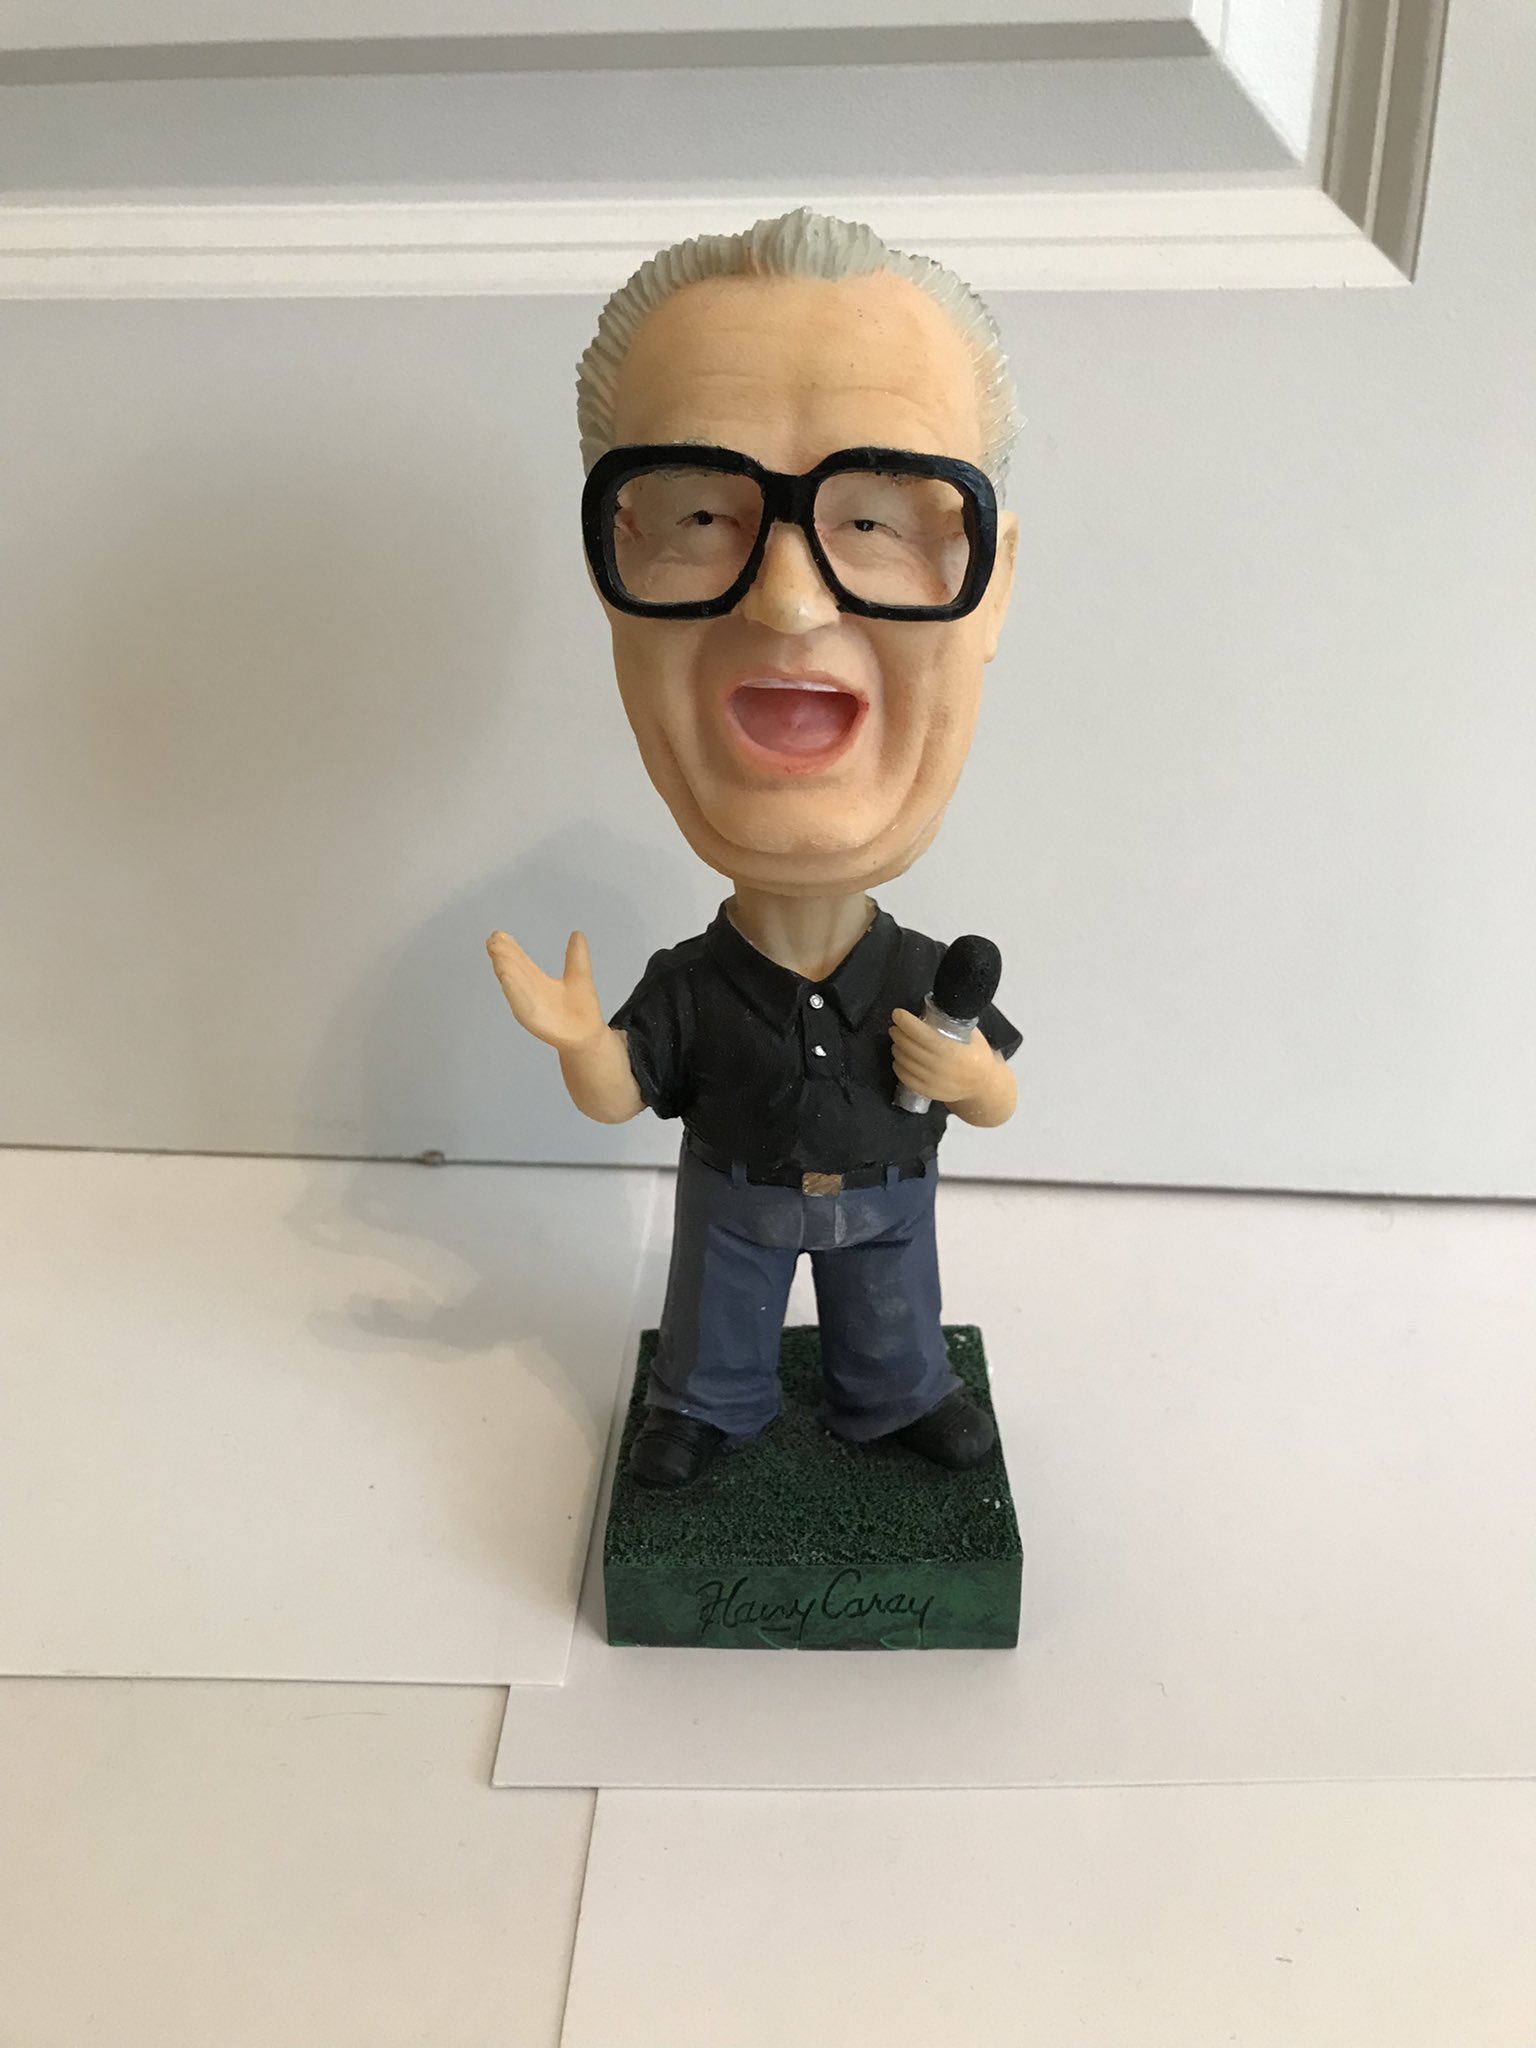 Crawly's Cubs Kingdom on X: Harry Caray was the beloved